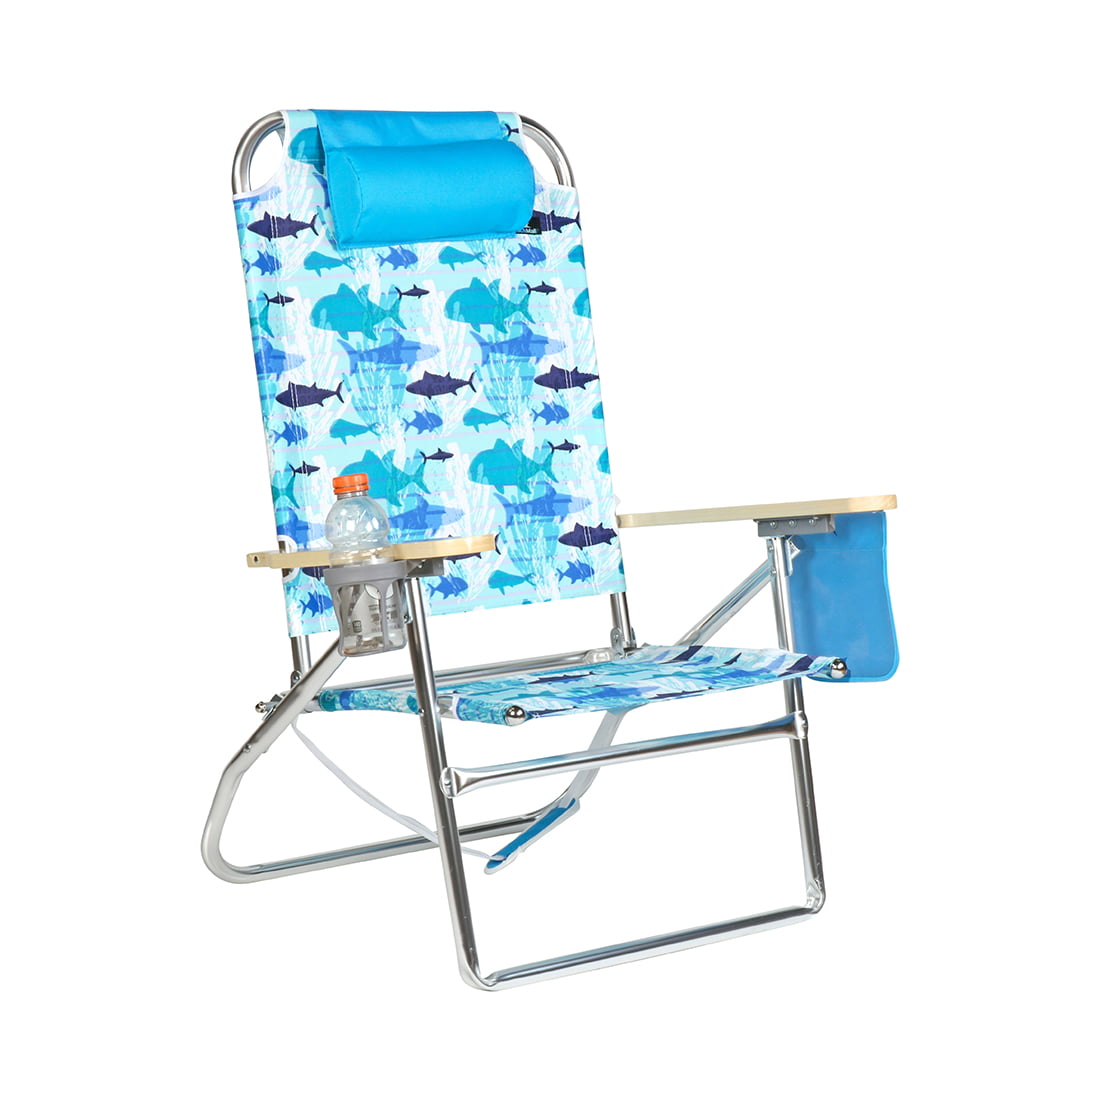 New Heavy Duty Reclining Beach Chair for Living room